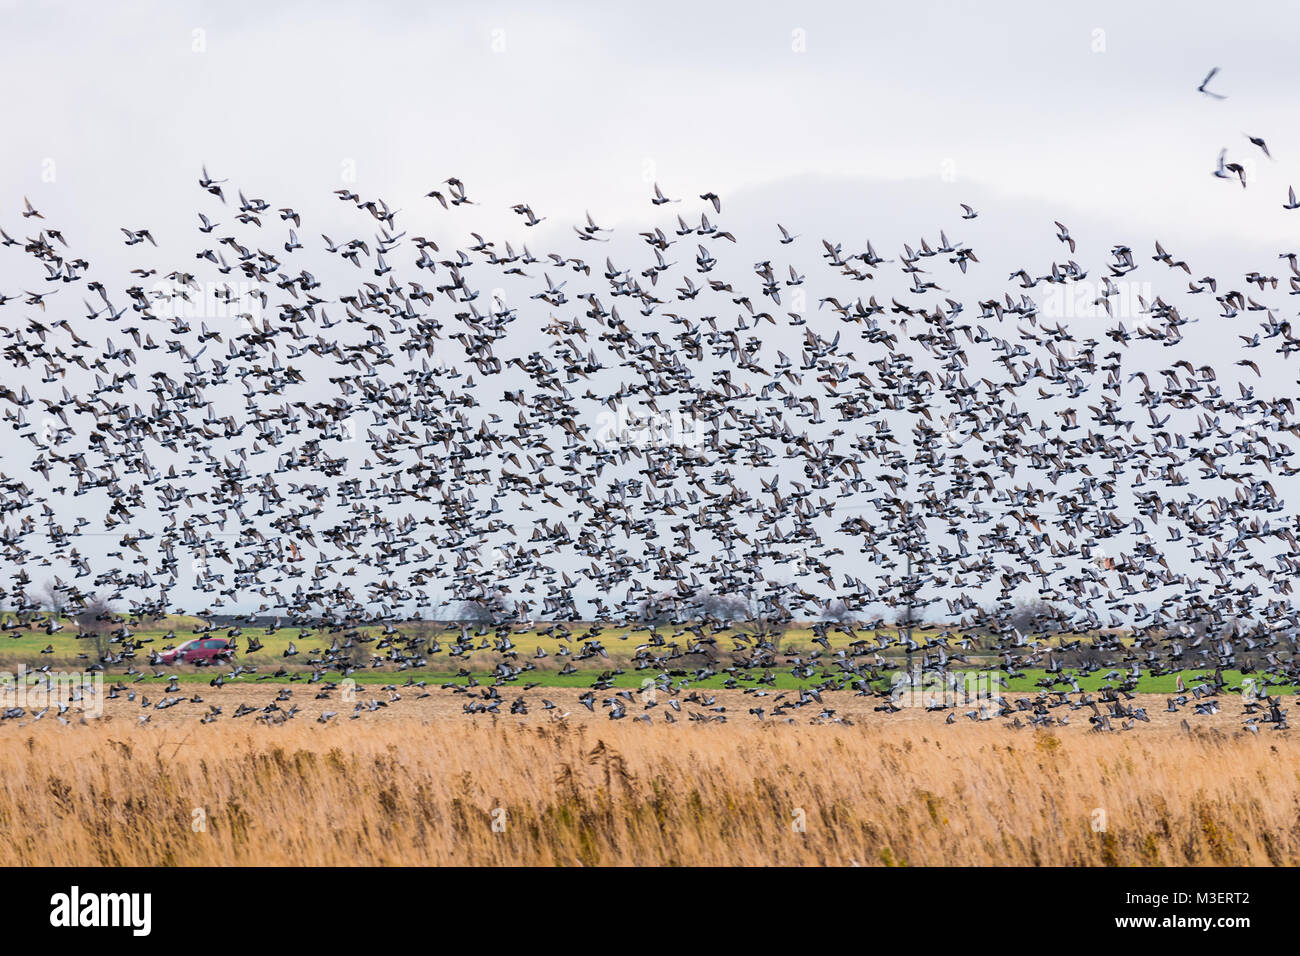 A large flock of birds lands in the field. Many pigeons. Stock Photo